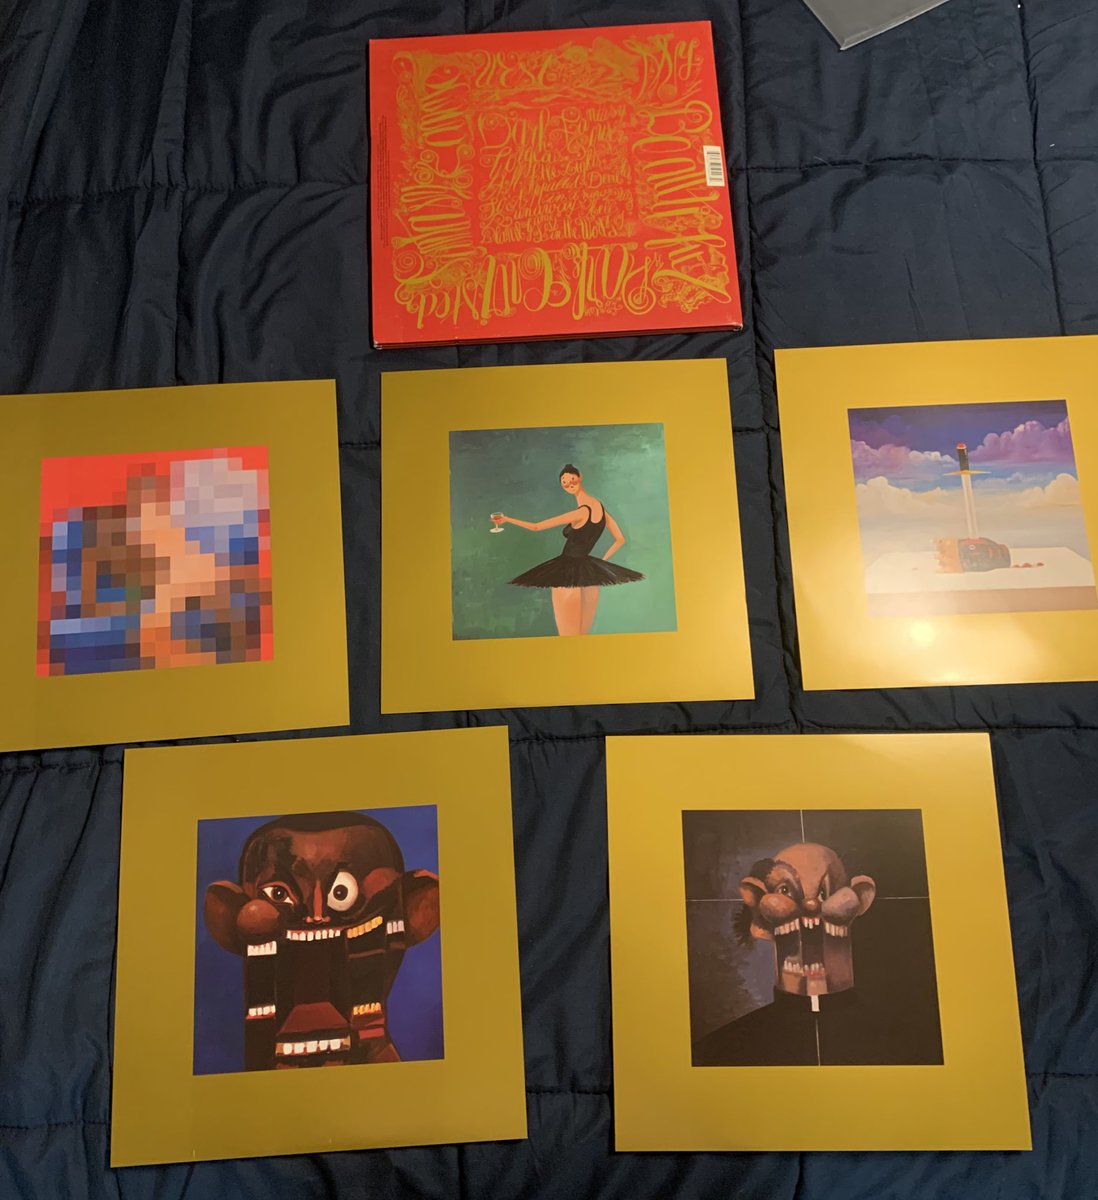 My Beautiful Dark Twisted Fantasy- Kanye West (pt.1) includes 24x36 double sided poster, and 5 interchangeable album covers